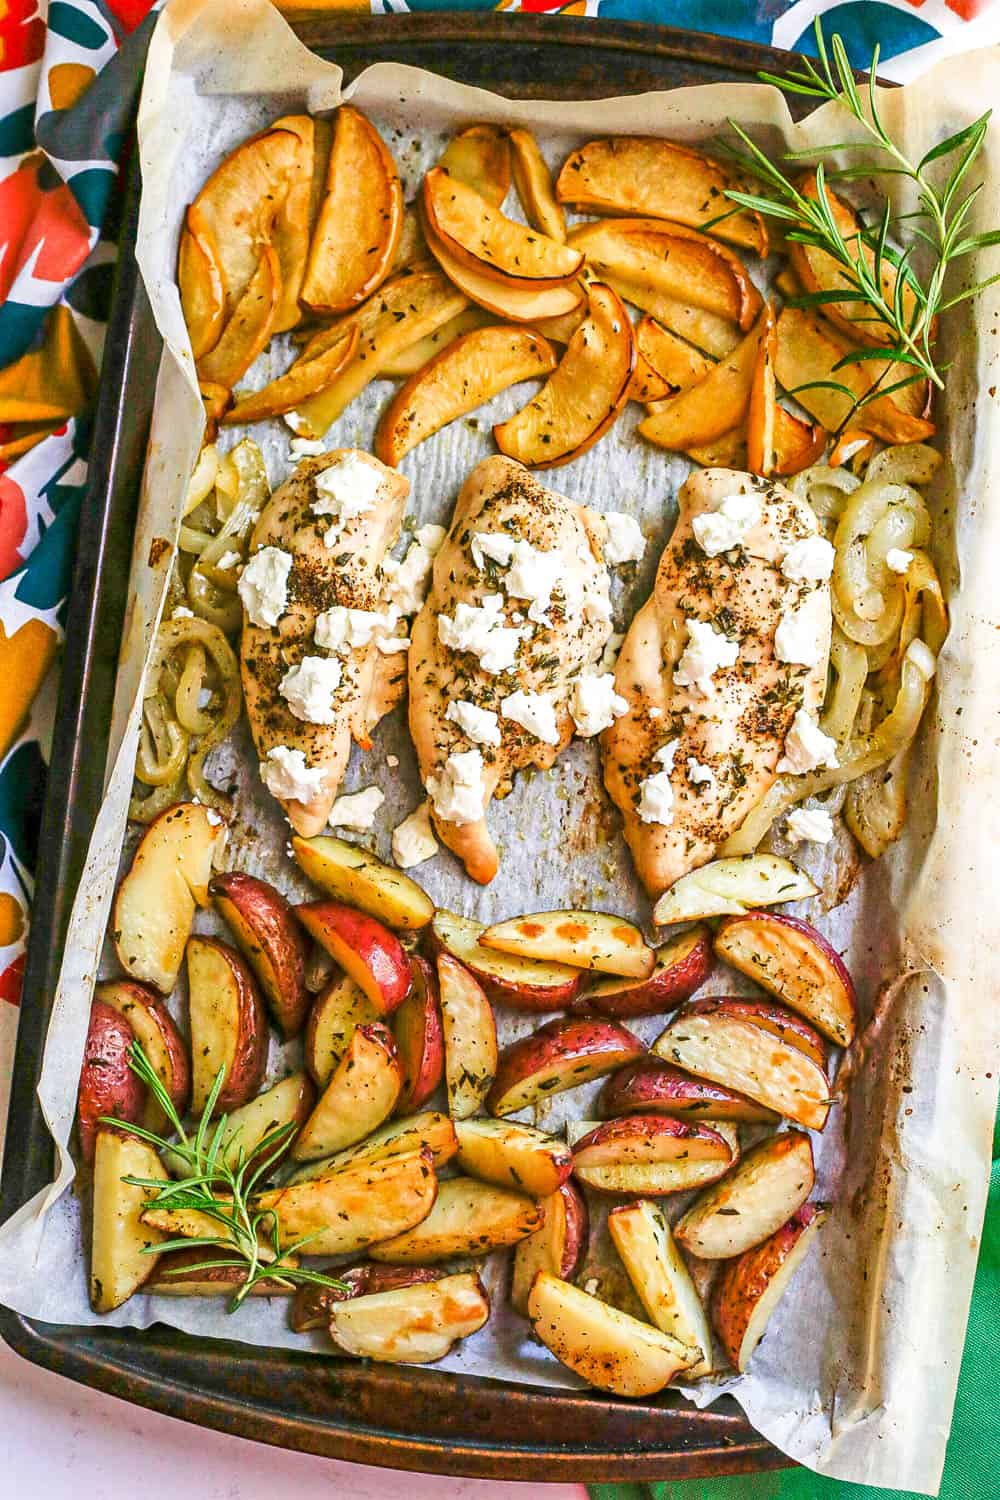 Roasted chicken breasts with rosemary and goat cheese alongside apples, onions and potatoes on a sheet pan